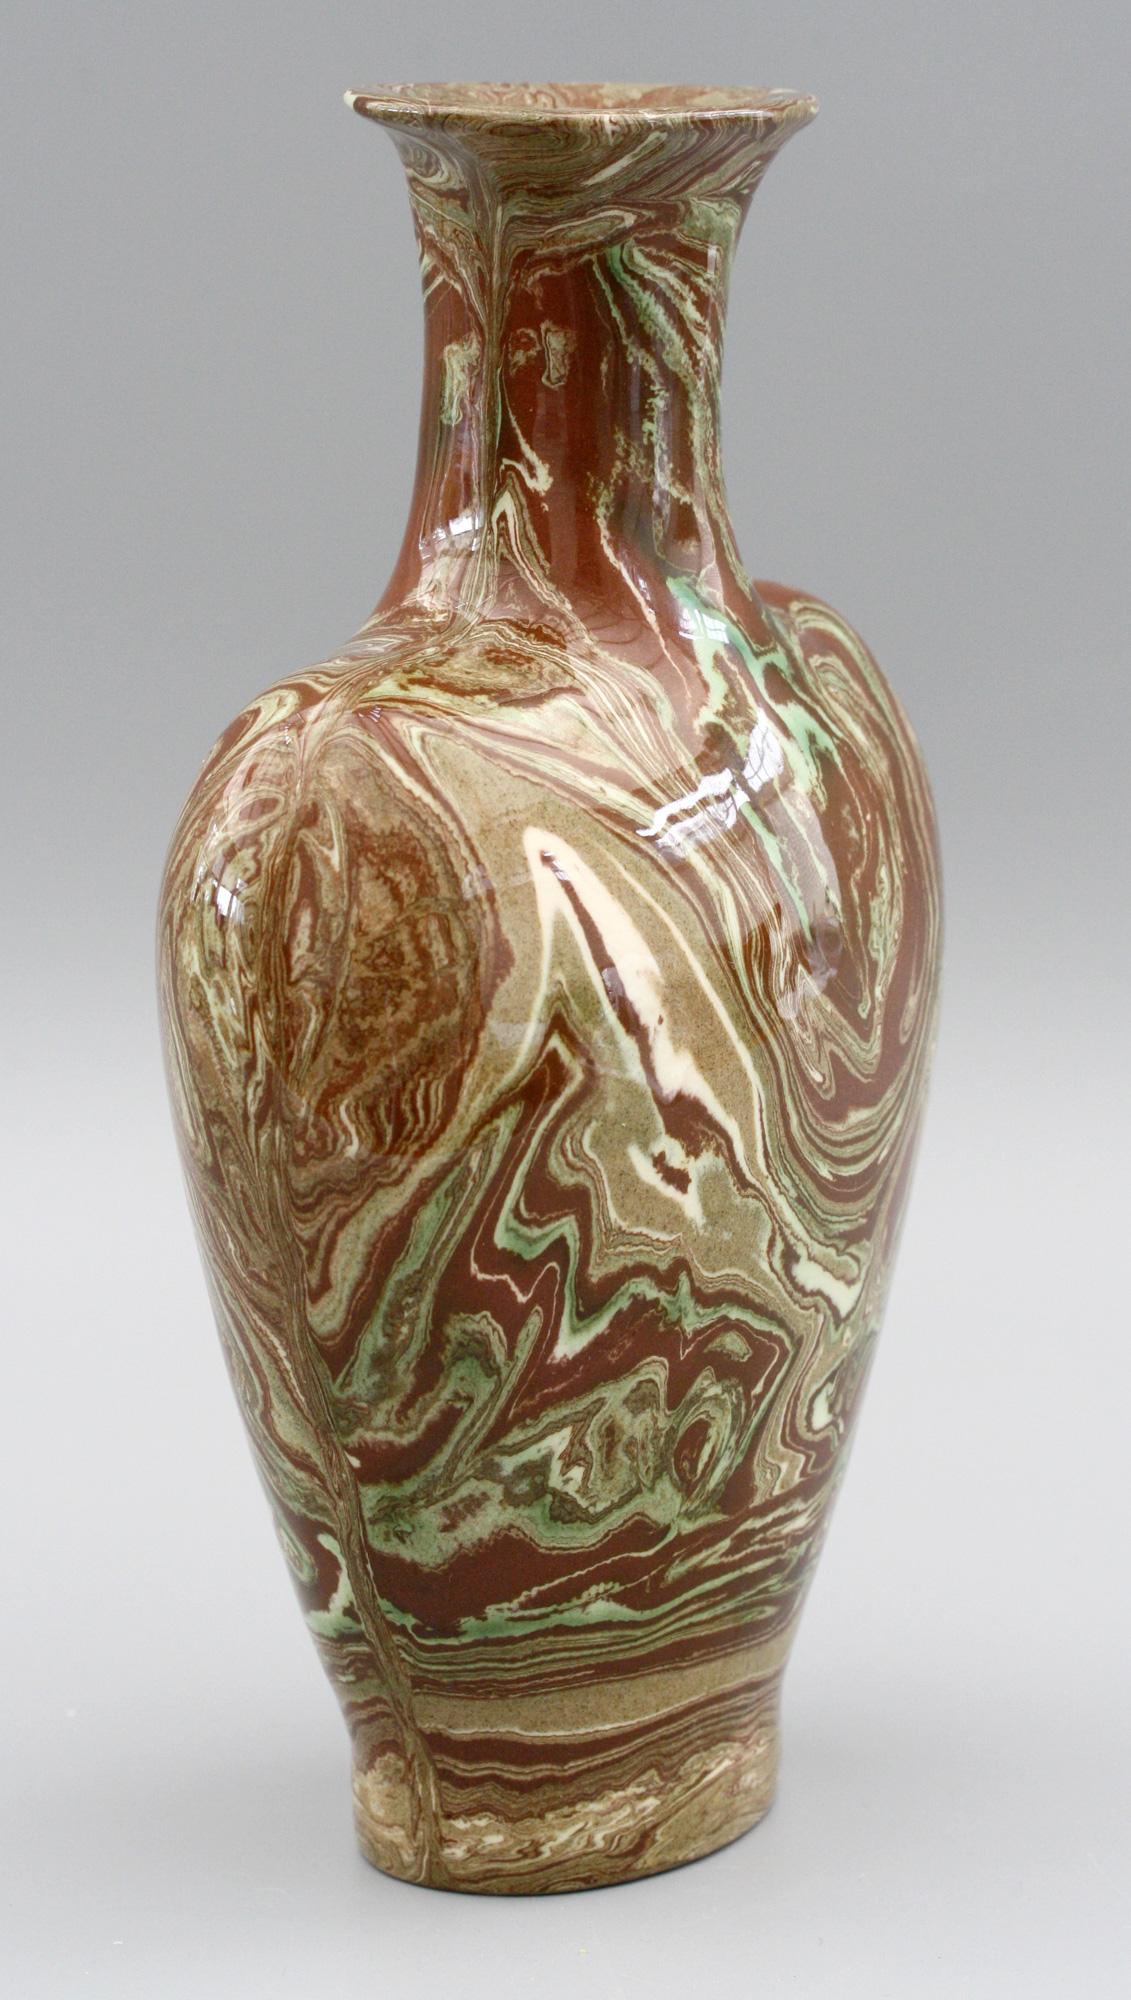 A stylish and unusual heart shaped brown marbled agate pottery vase by John Thomas Morton and made at his Filey workshop in Yorkshire, circa 1933. This stylish pottery vase is made in red clay with marbled swirls in green, cream and light brown